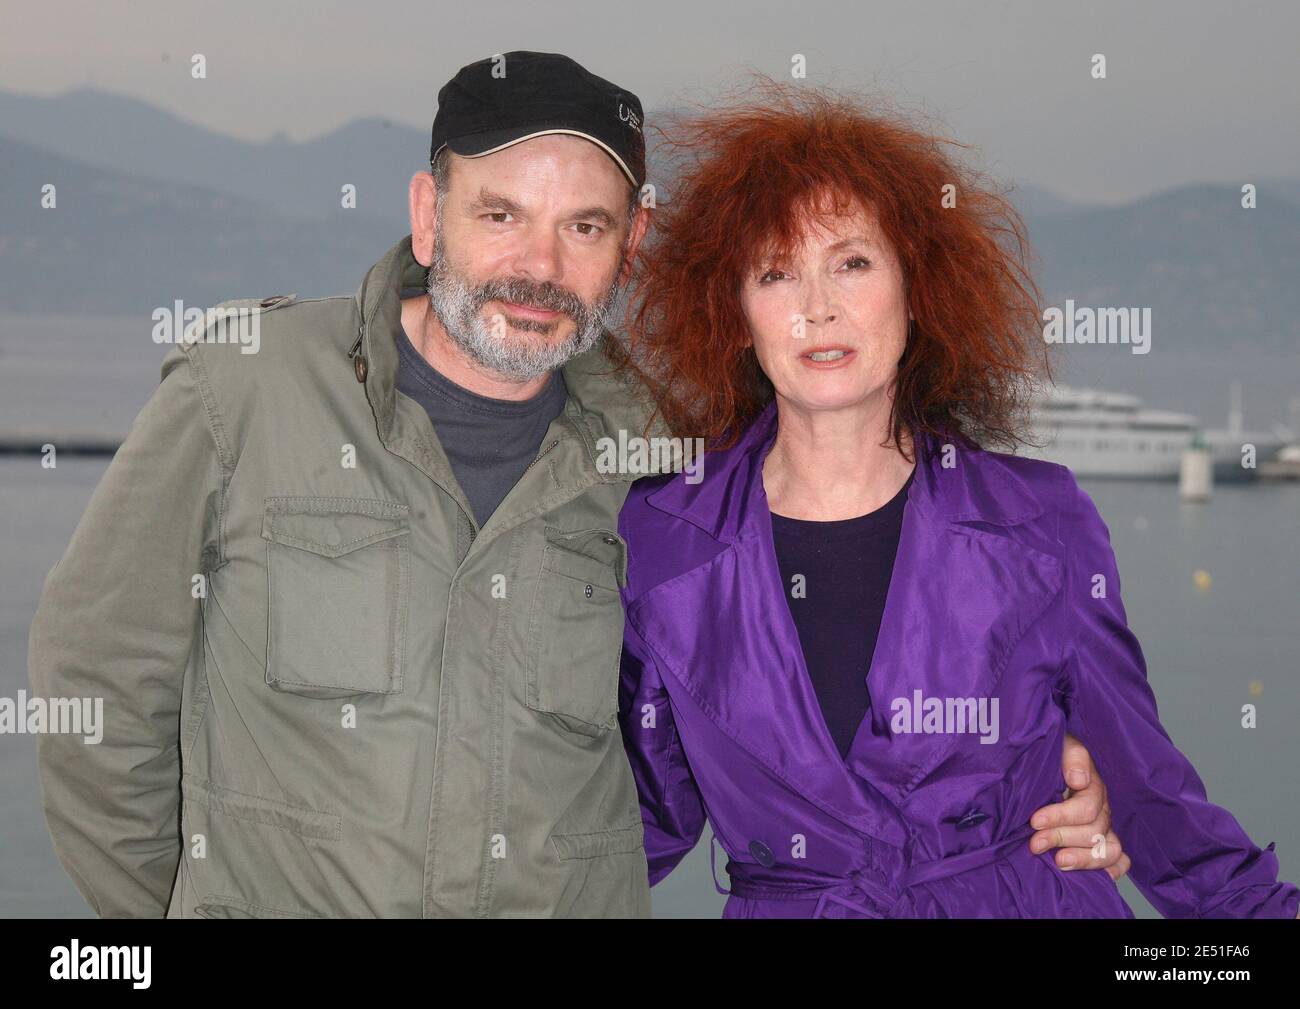 Cast members Sabine Azema and Jean-Pierre Darroussin pose at a photocall for their latest movie 'Le voyage aux Pyrenees' during the 61st Cannes Film Festival in Cannes, France on May 16, 2008. Photo by Denis Guignebourg/ABACAPRESS.COM Stock Photo